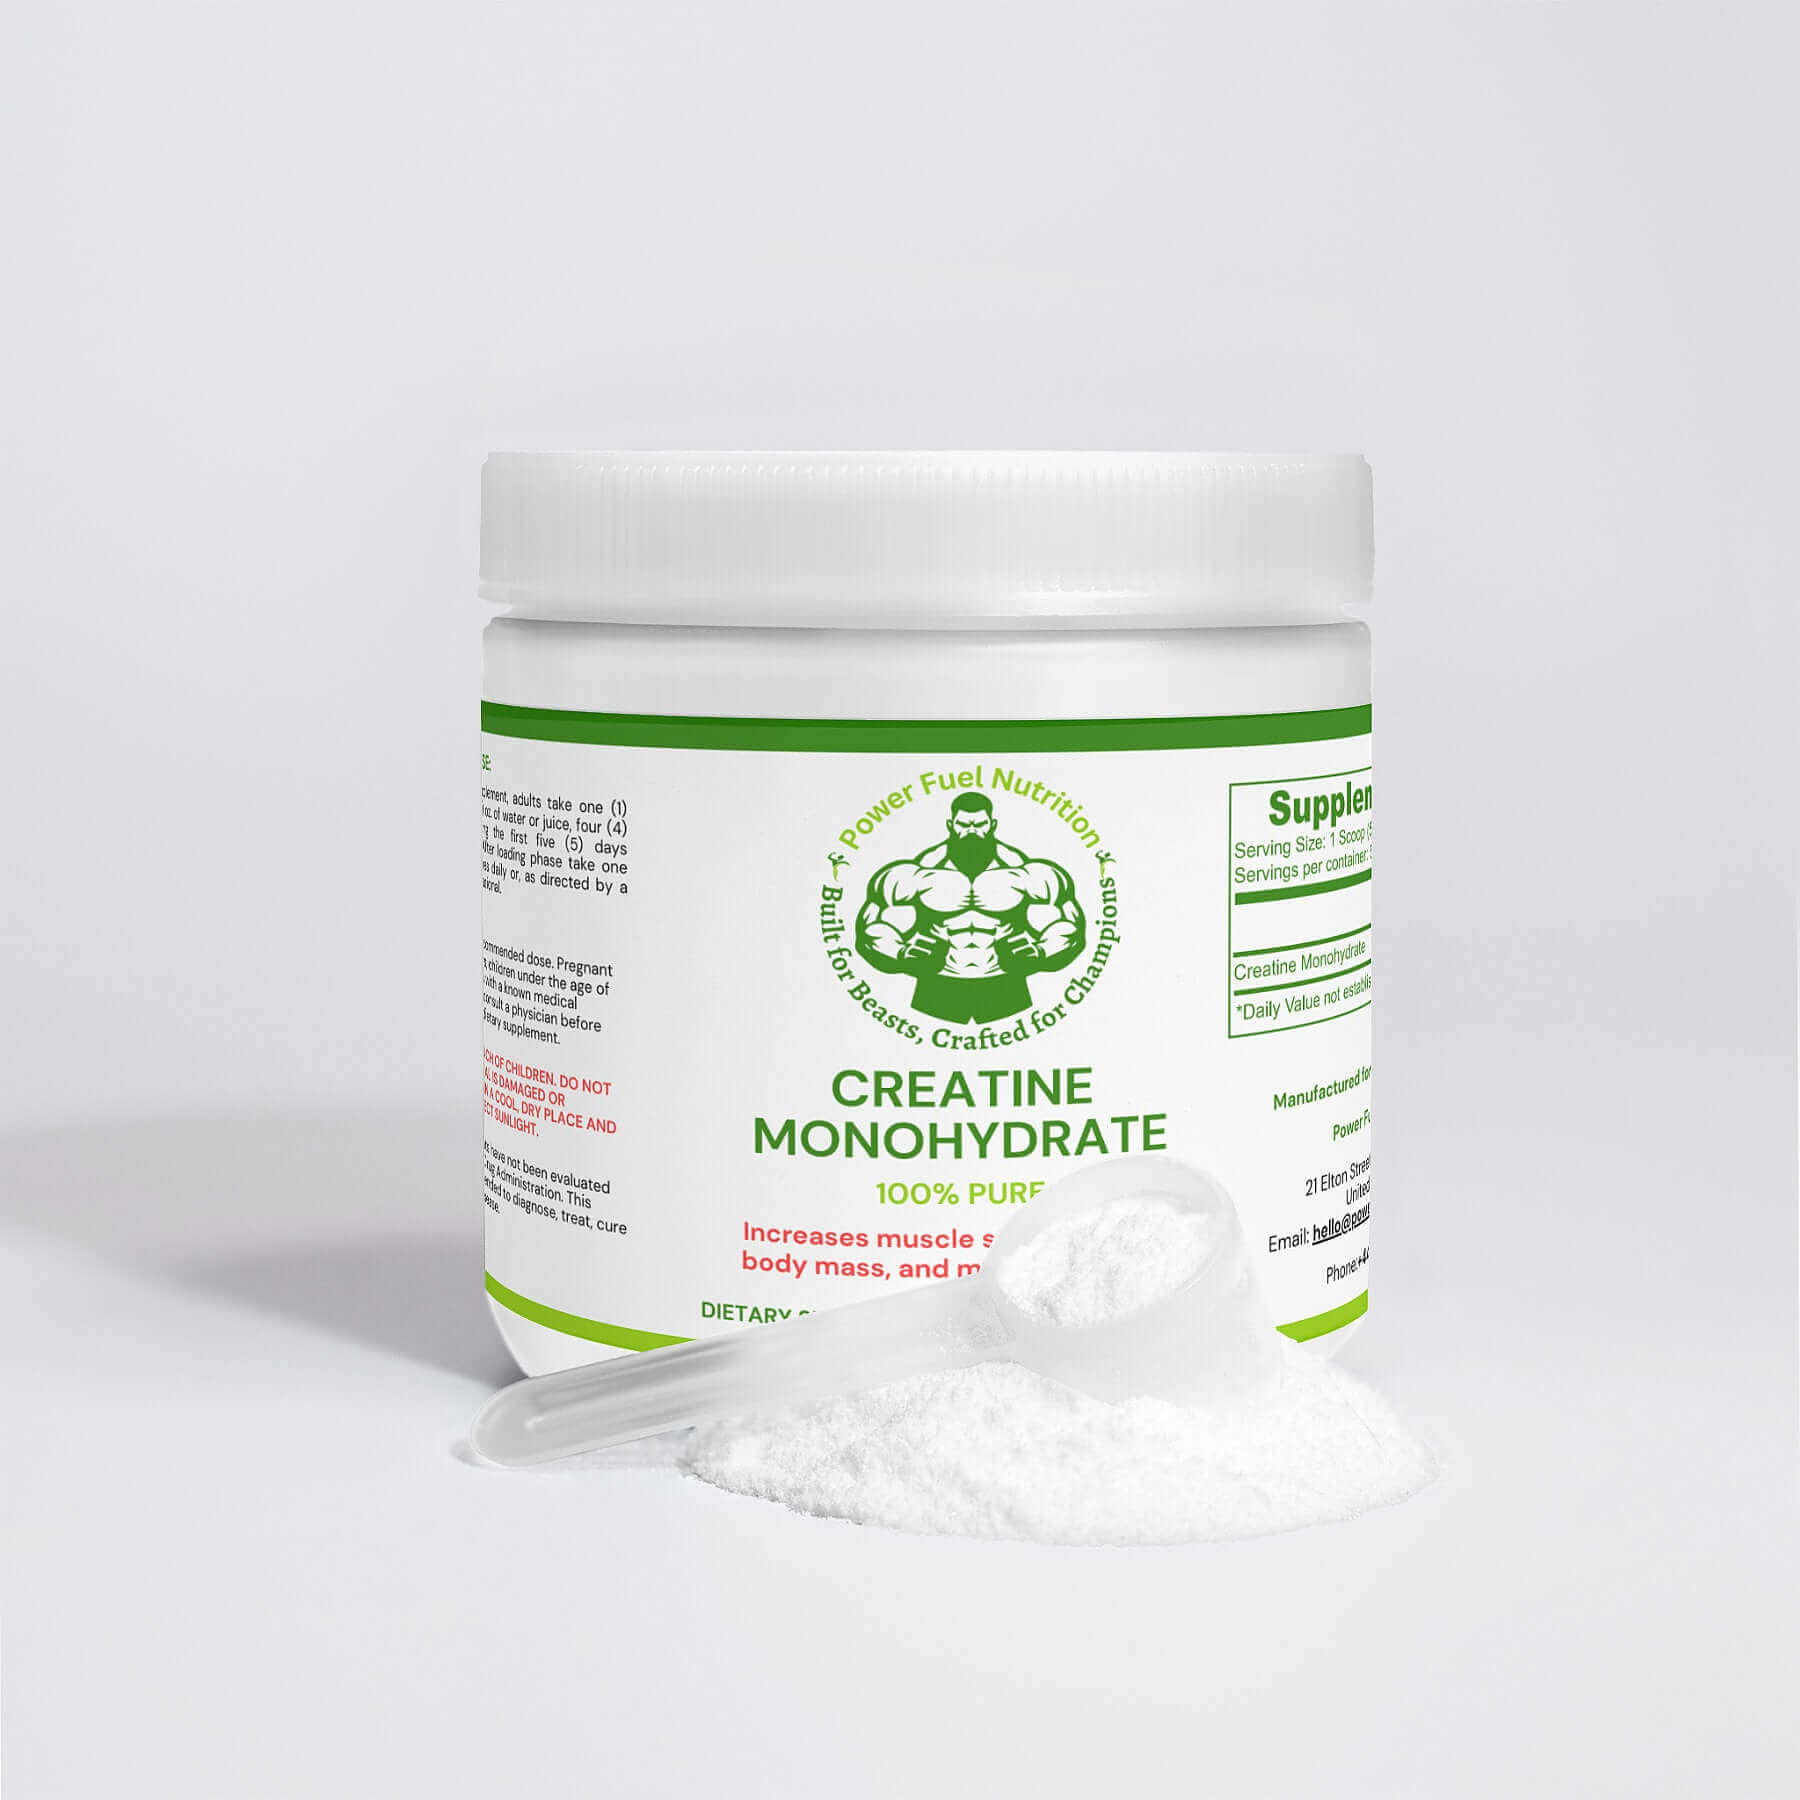 Creatine Monohydrate> "Experience explosive strength and muscle growth with Power Fuel Nutrition's Creatine Monohydrate! Increase your power output & improve athletic performance > $35.50 > Power Fuel Nutrition